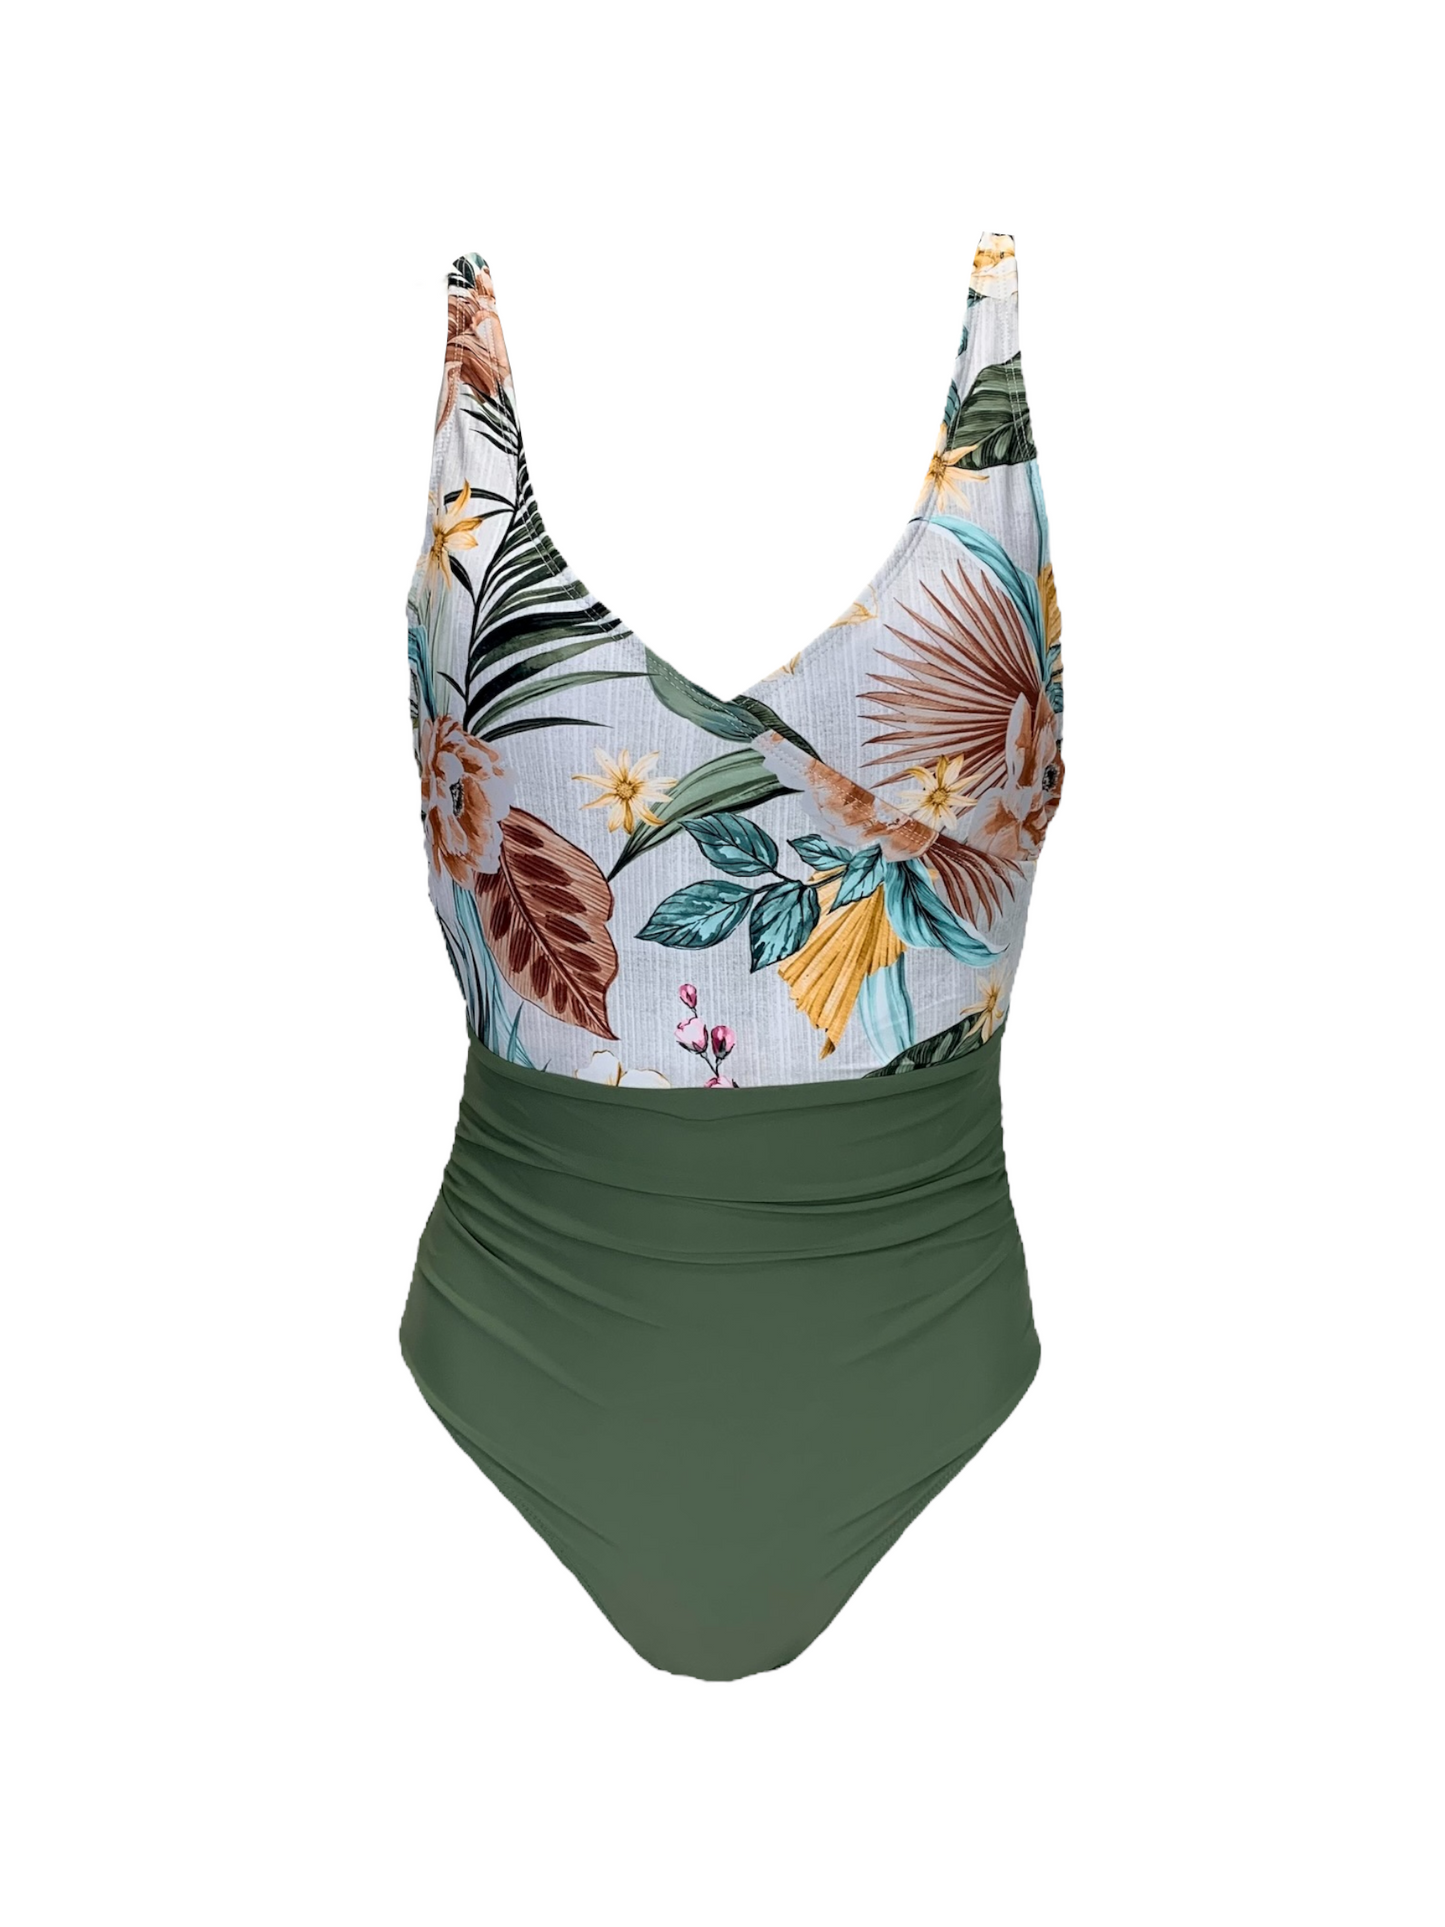 Women's Nass Woman green and white one-piece swimsuit